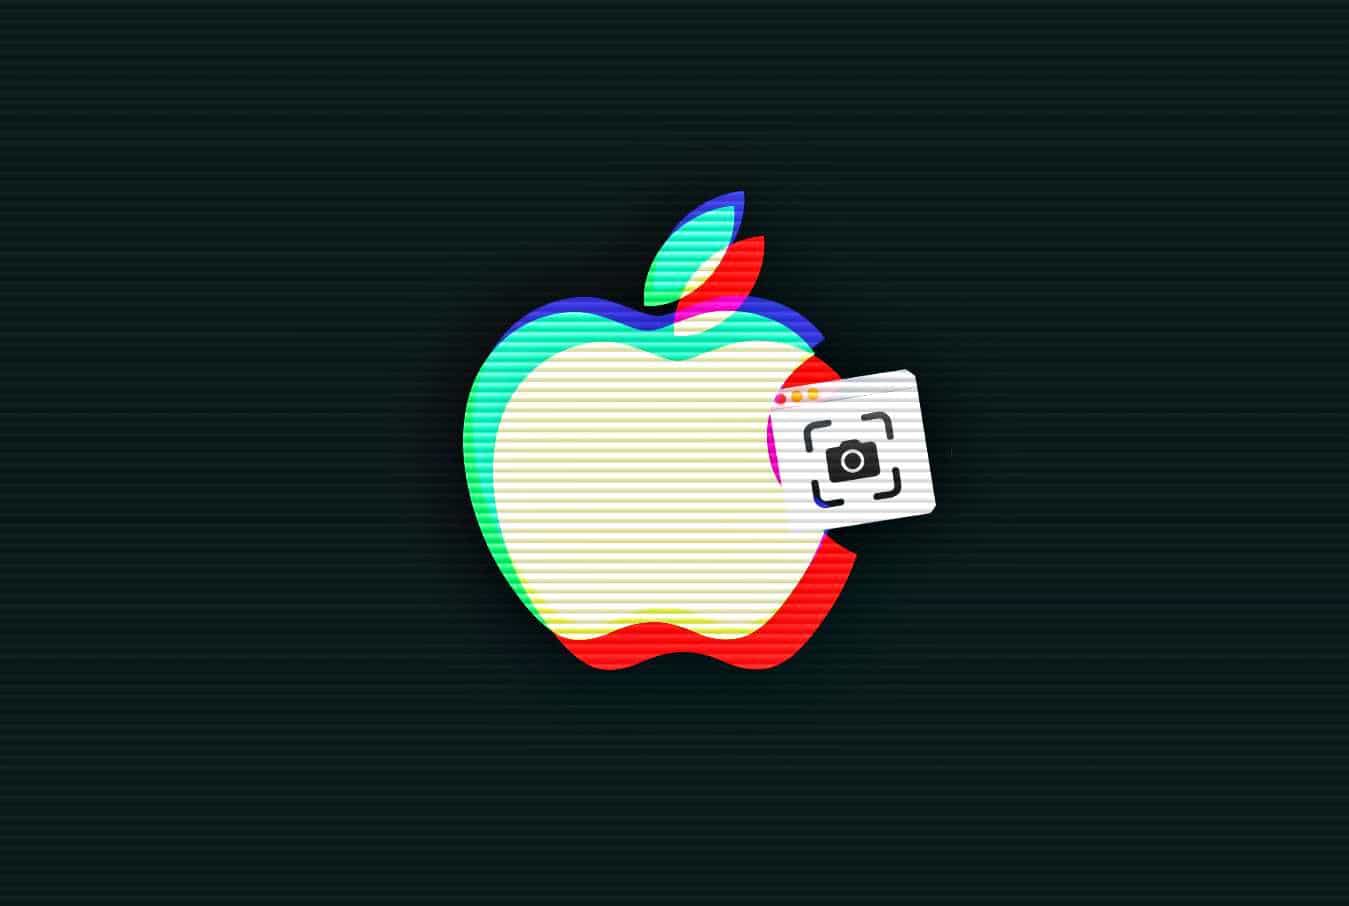 Hackers used macOS 0-days to bypass privacy features, take screenshots